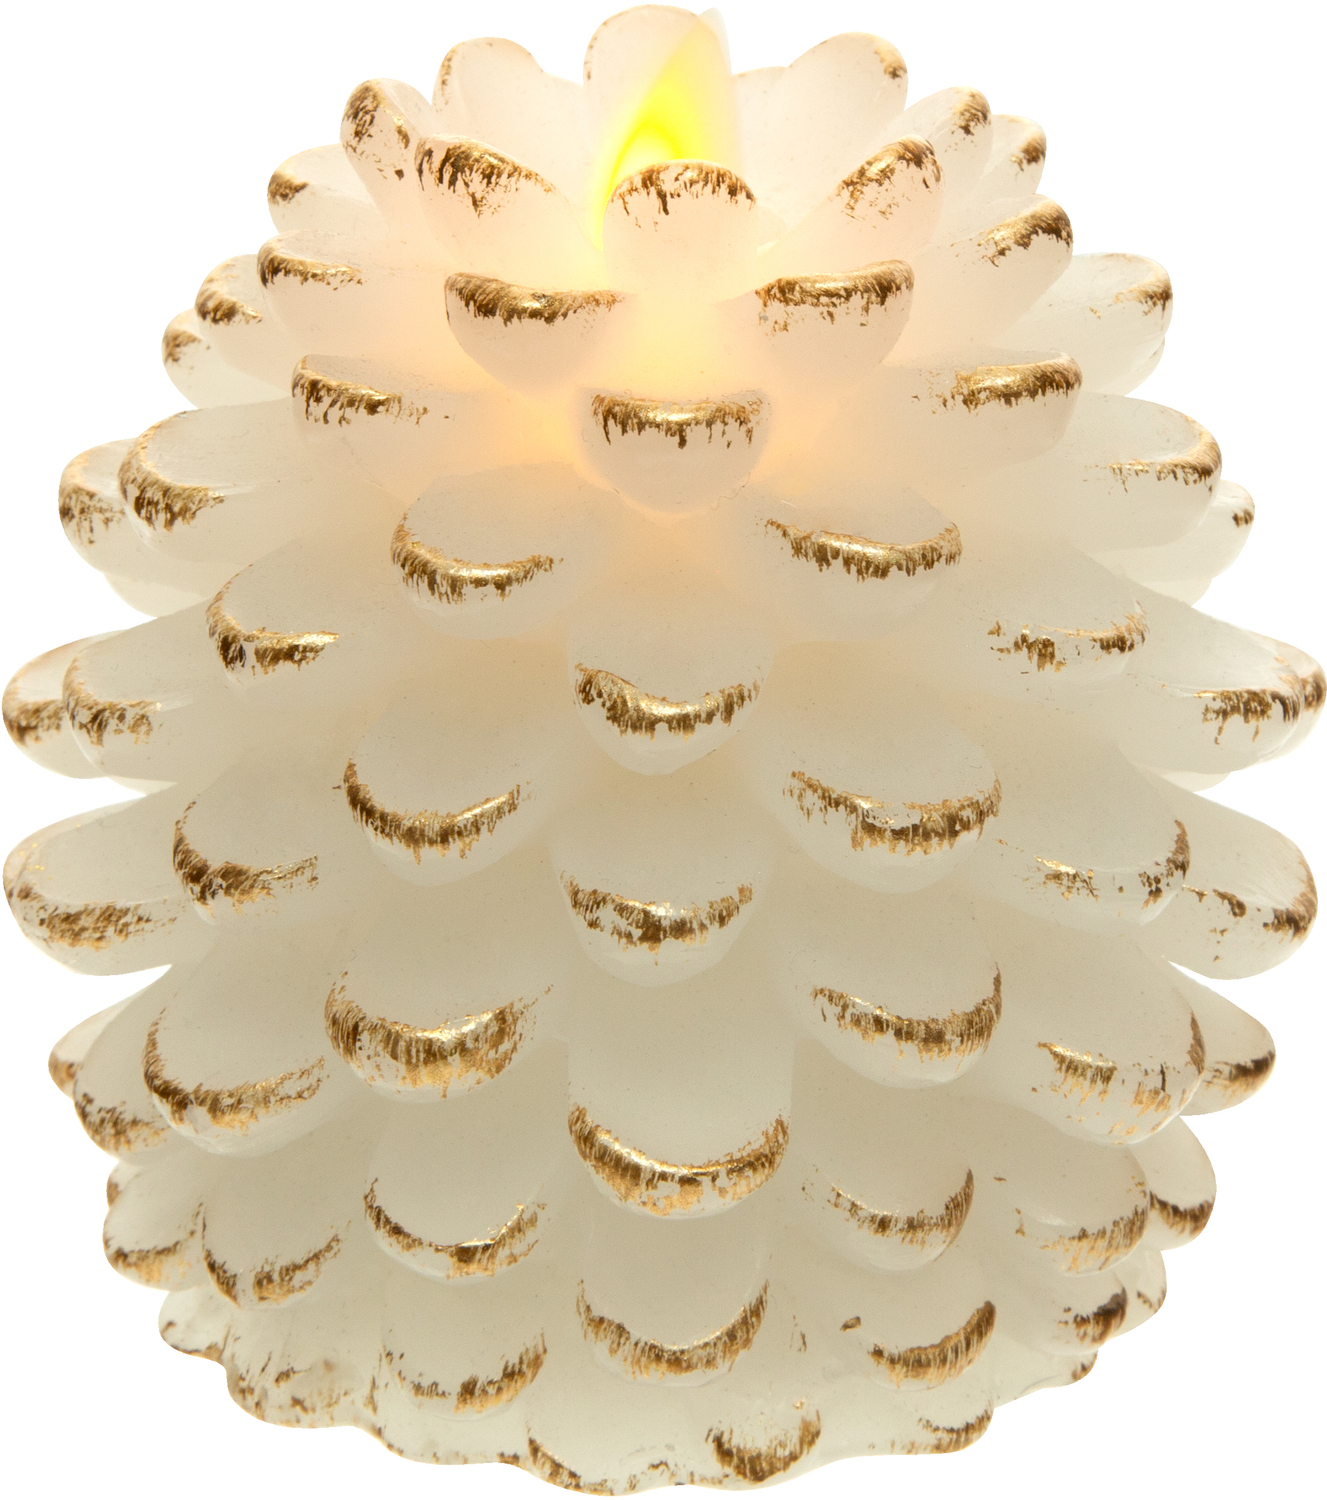 White Pine Cone by Pavilion Accessories - White Pine Cone - 4.25" Realistic Flame LED Lit Candle